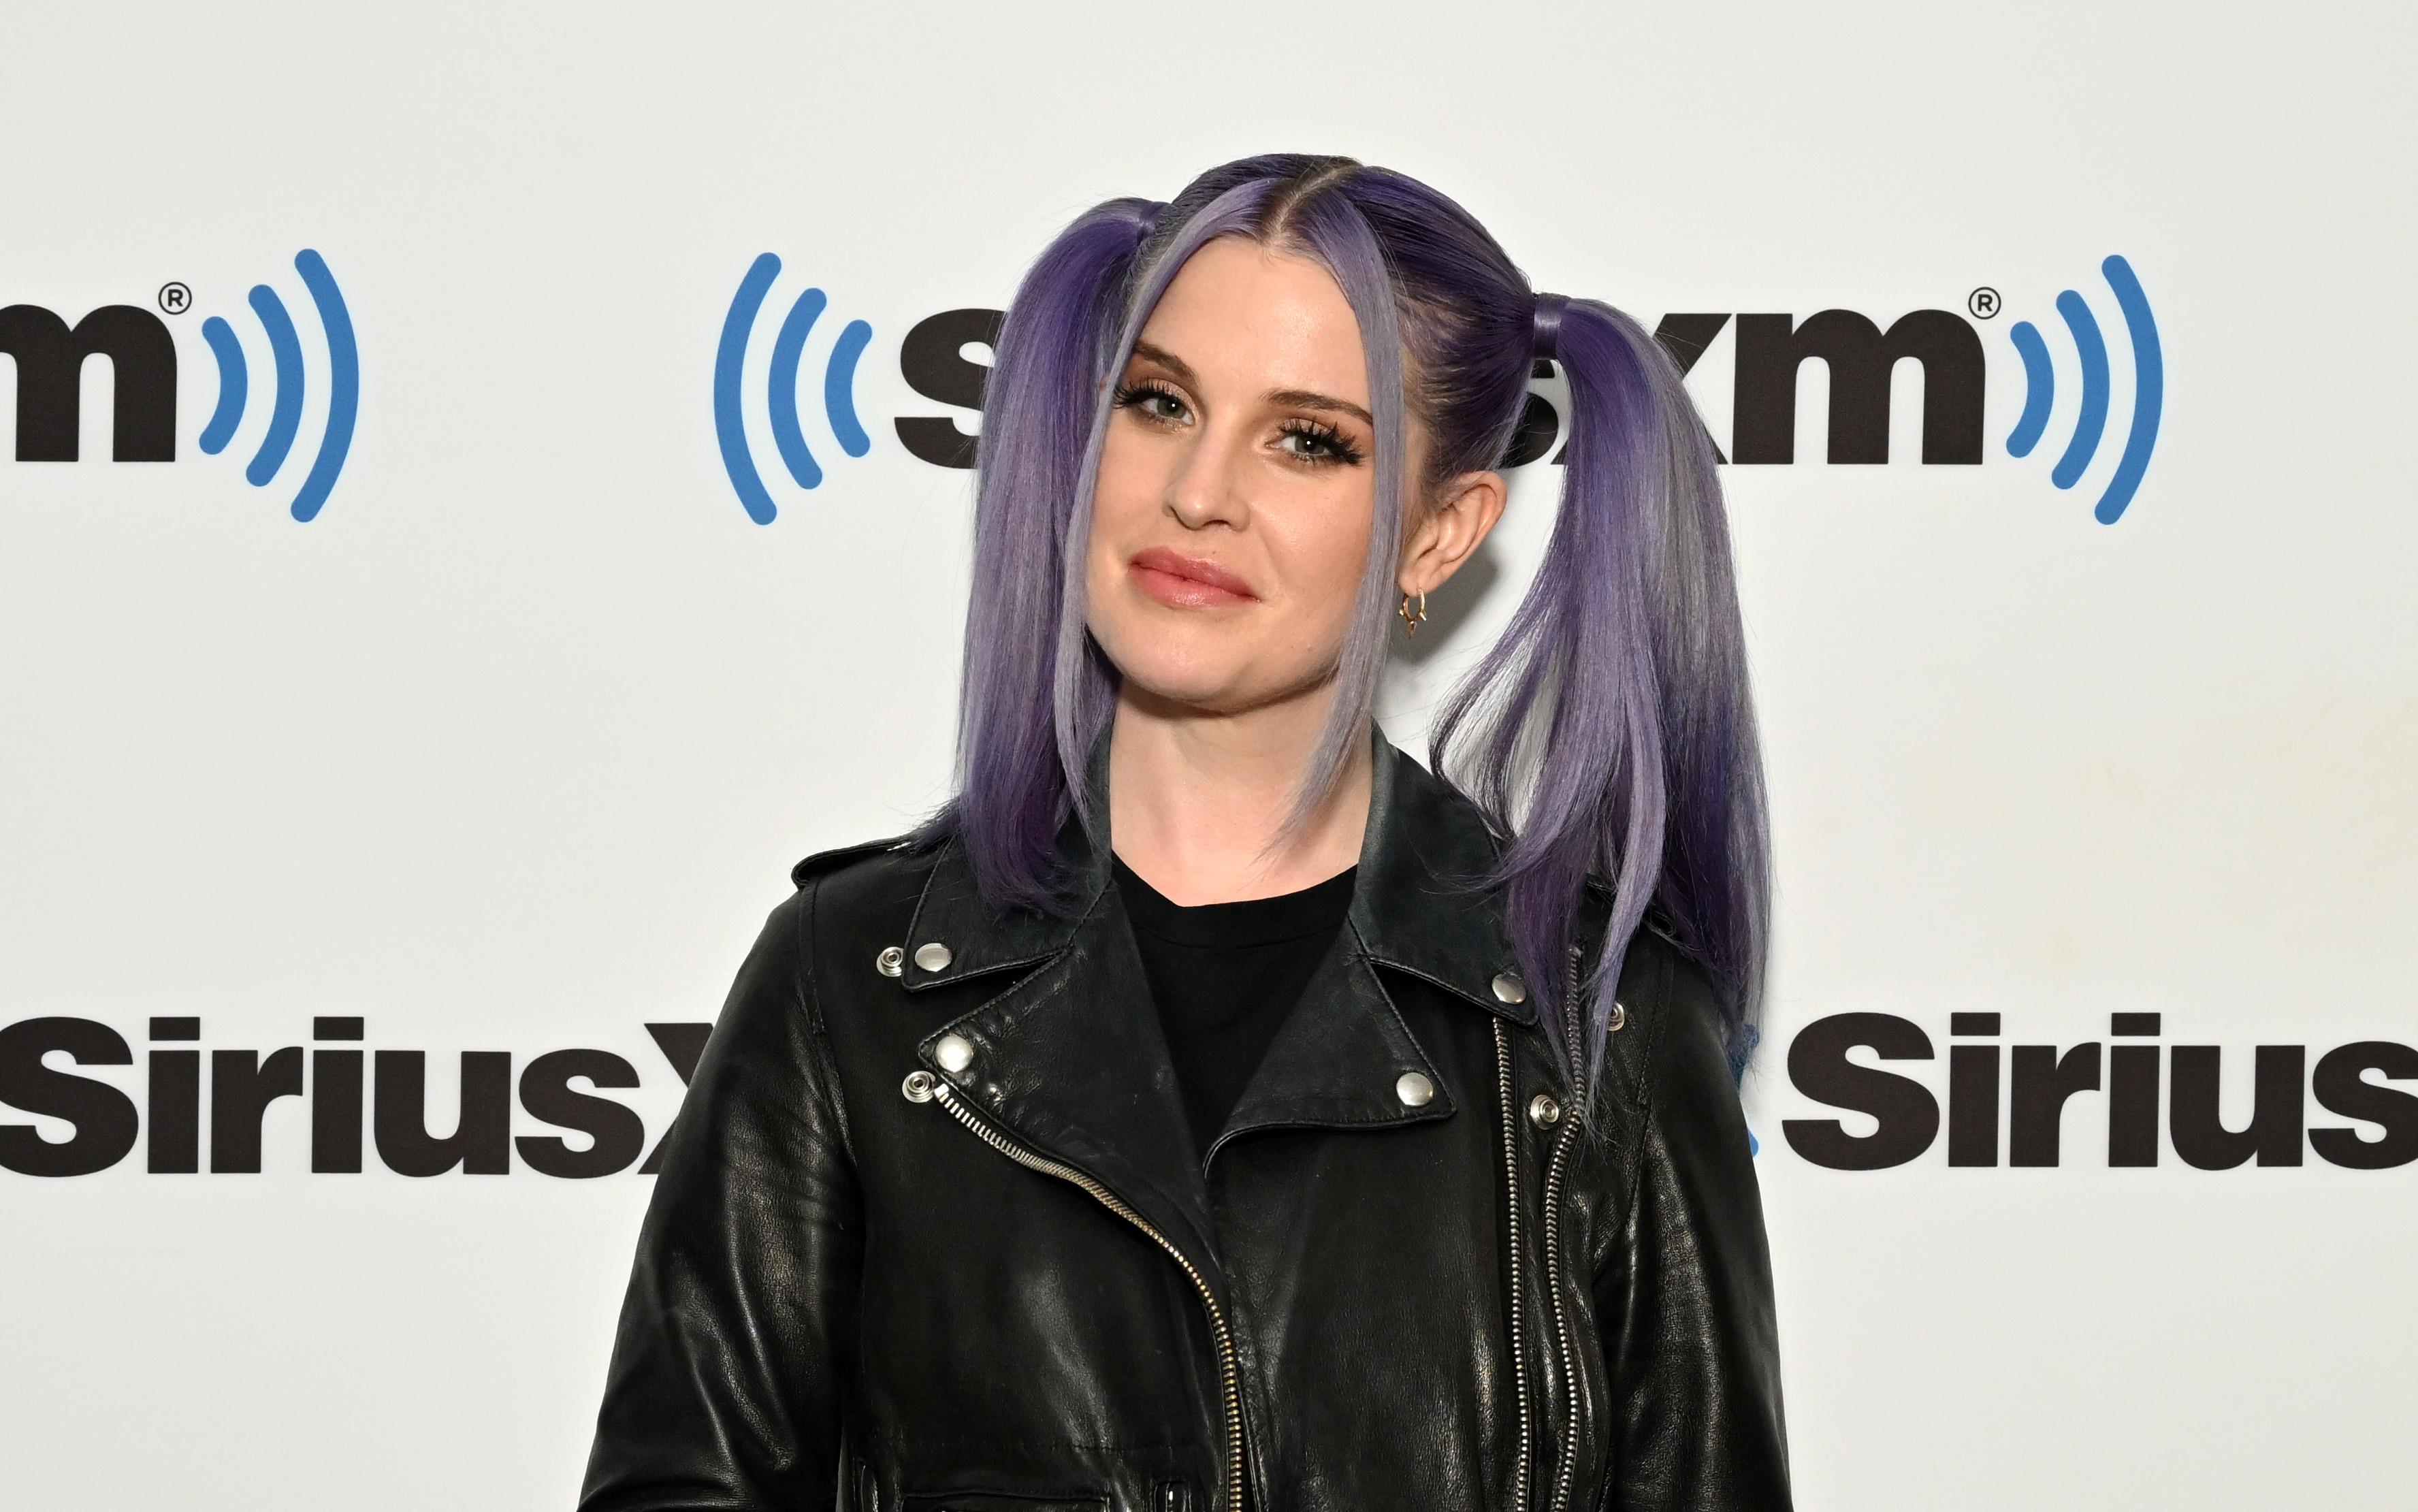 Kelly Osbourne posing in a leather jacket at a SiriusXM event